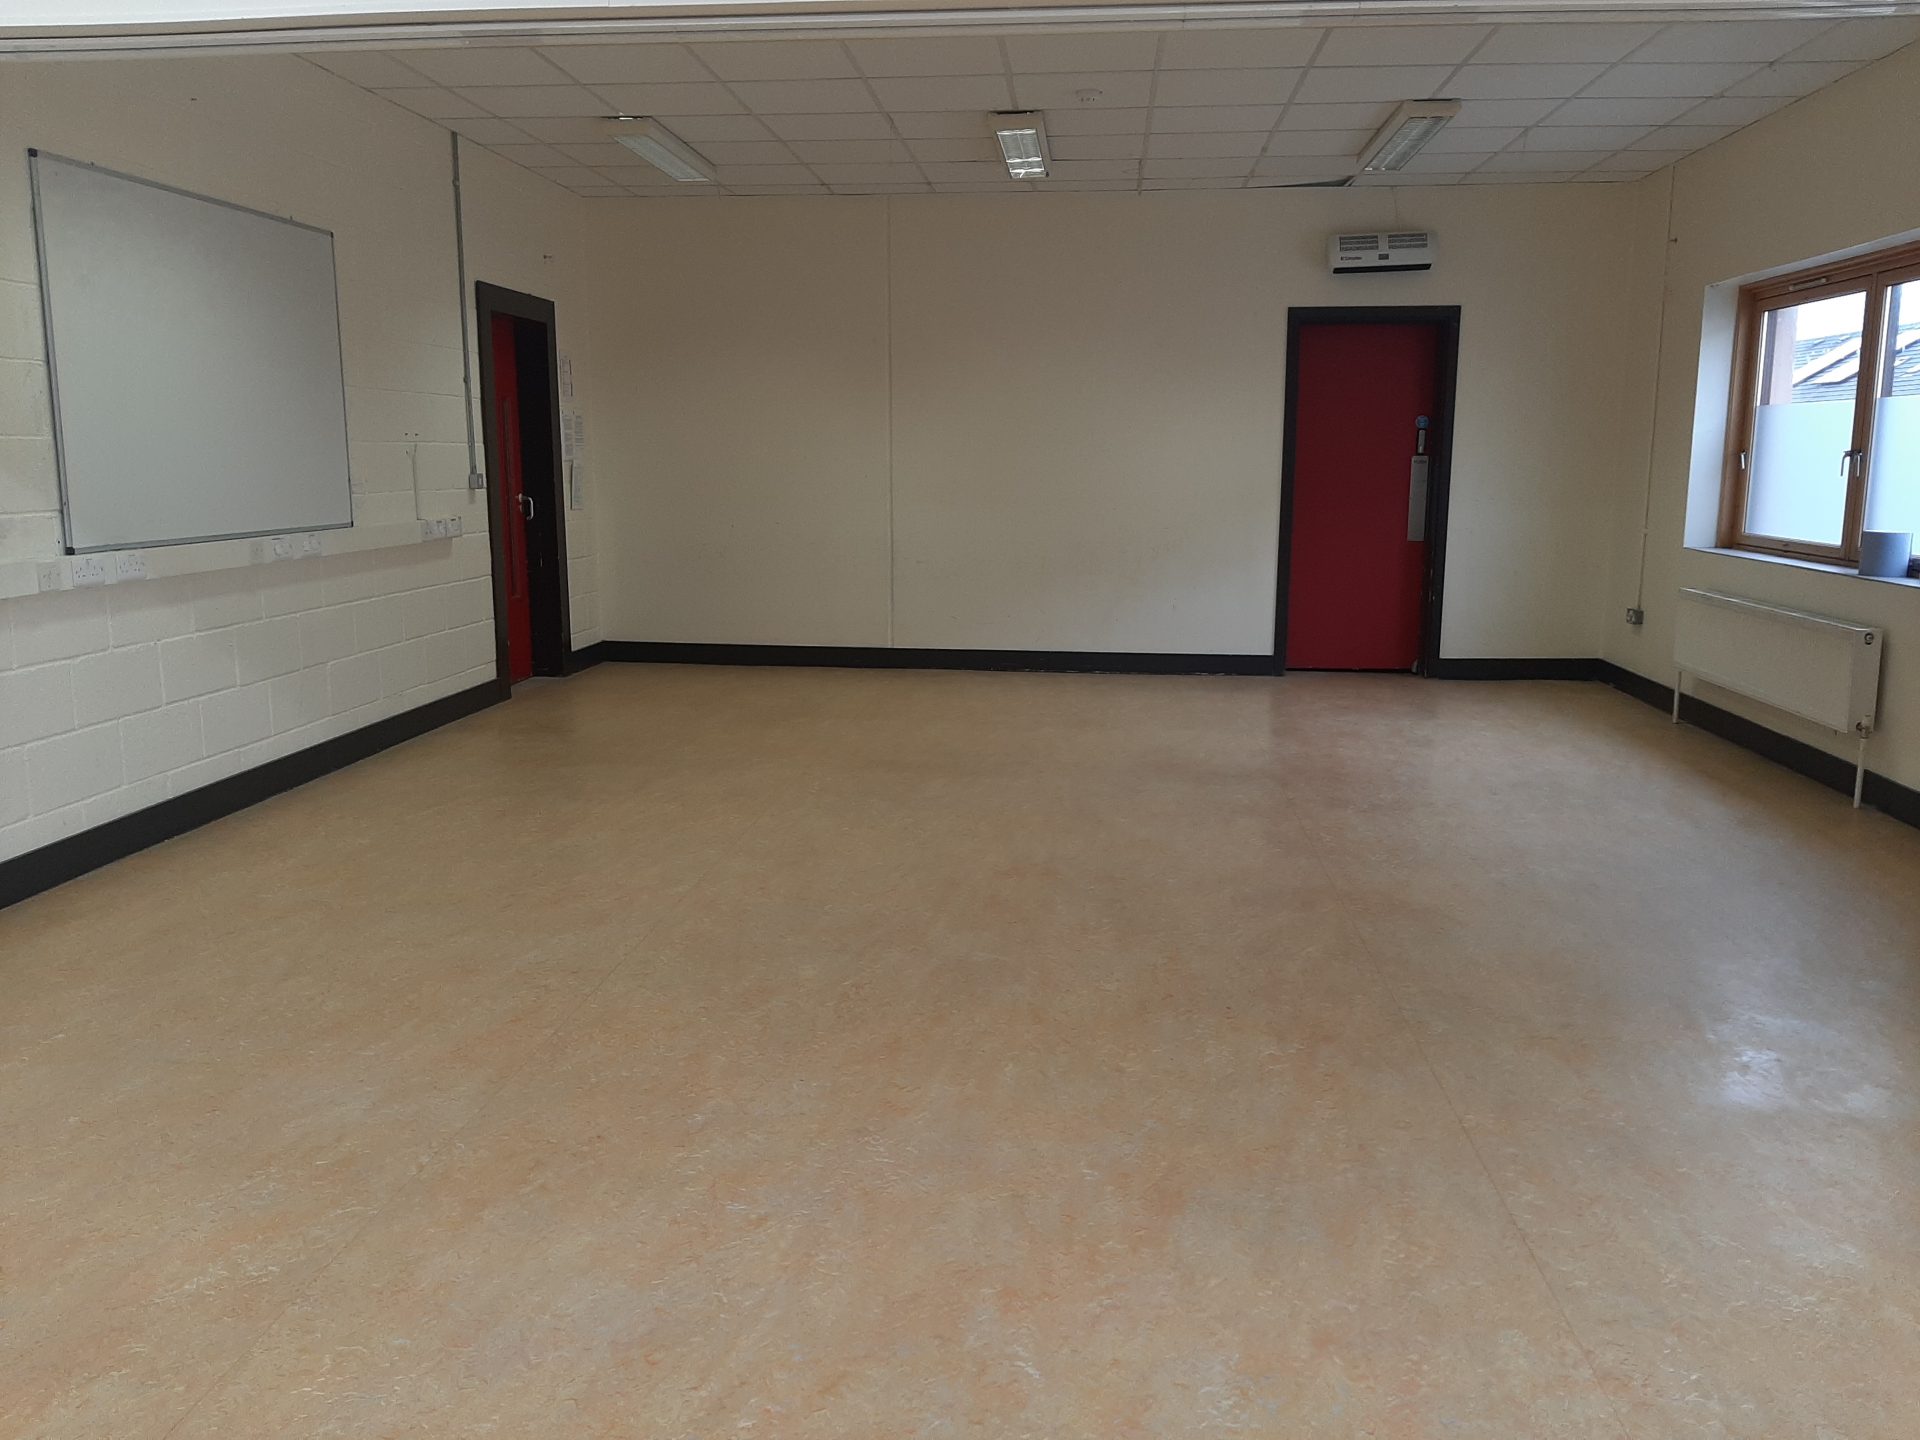 Diswellstown Community Recreation Centre Meeting Room